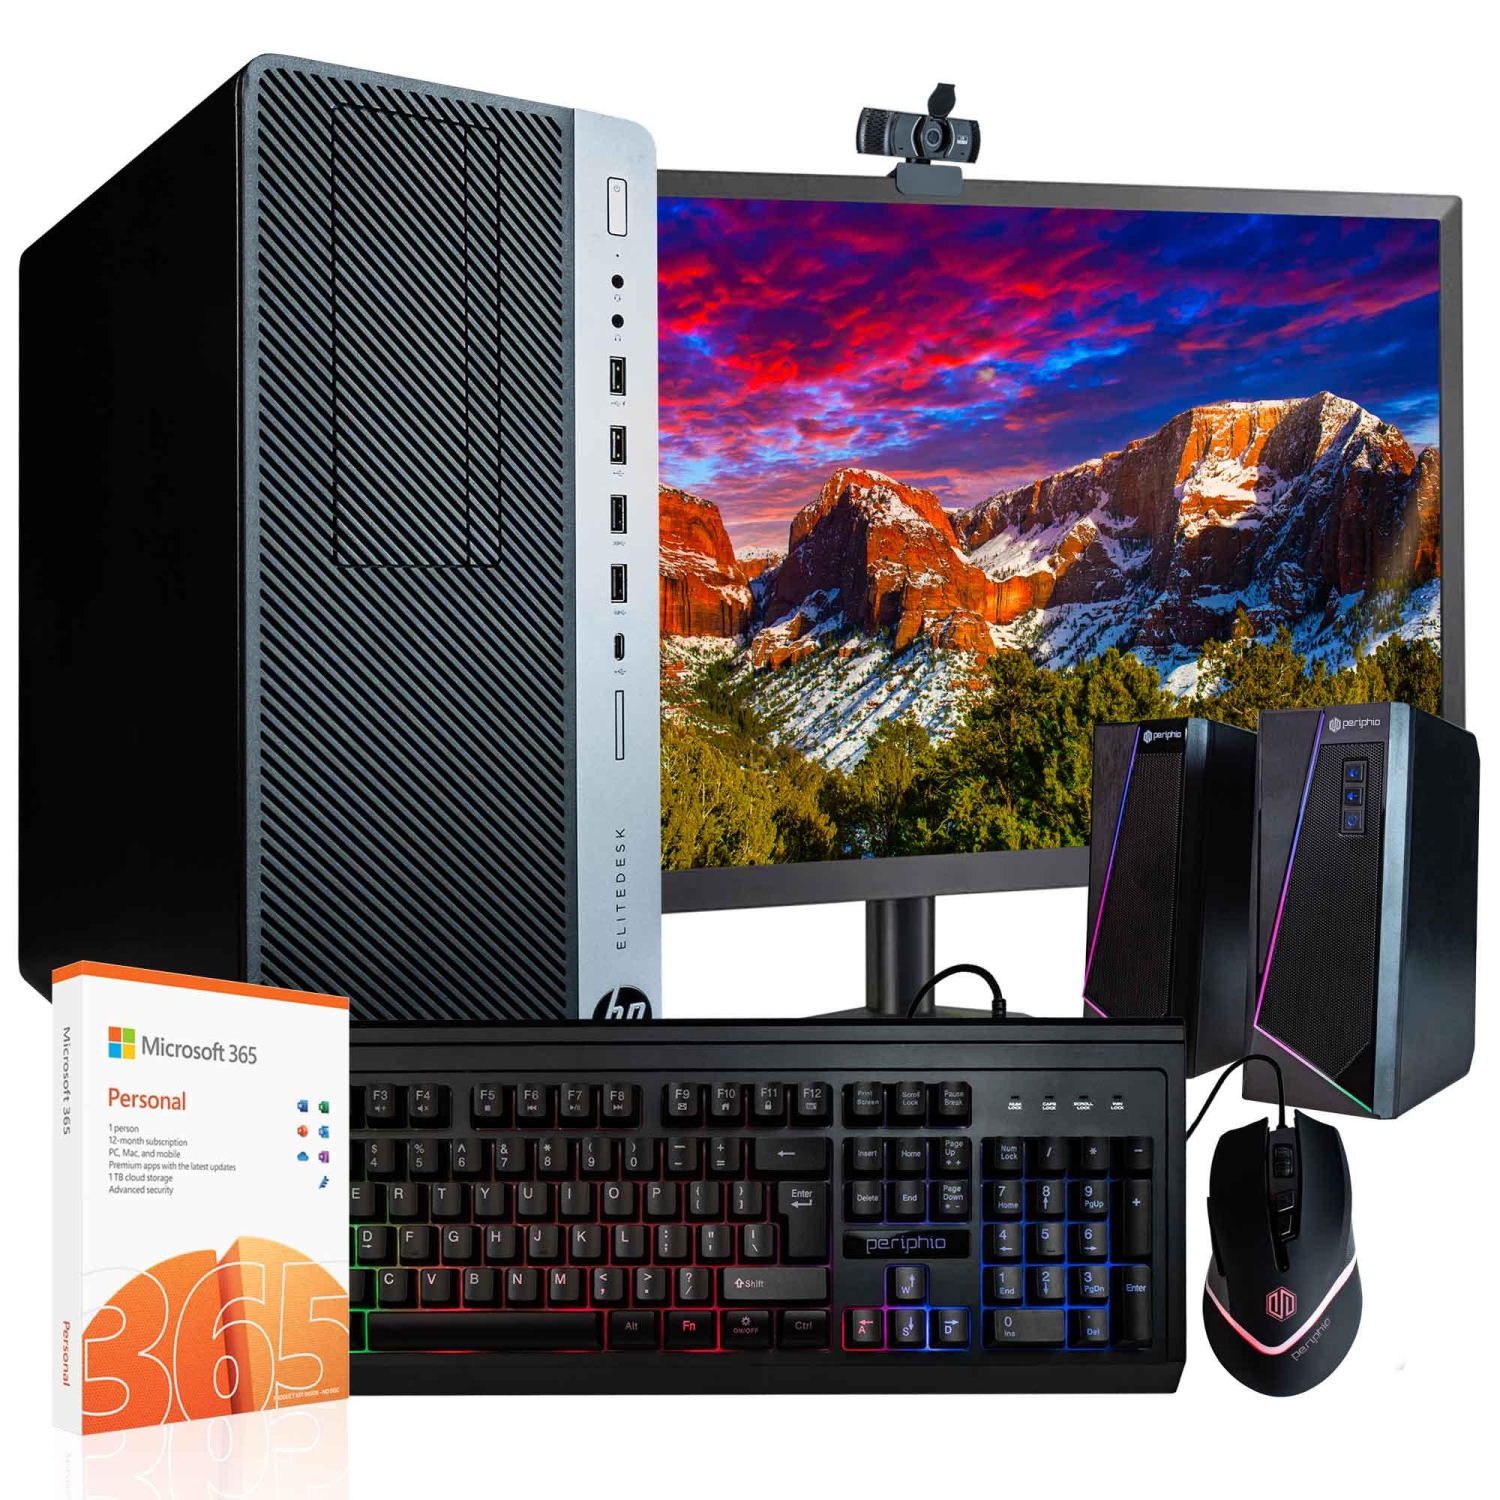 Refurbished(Good) HP EliteDesk 800G4 Tower Desktop Computer | Hexa Core Intel i7 (3.4)| 16GB DDR4 RAM | 500GB SSD| Win 11 Pro | New 22in LCD Monitor| Office 365 | Home or Office PC